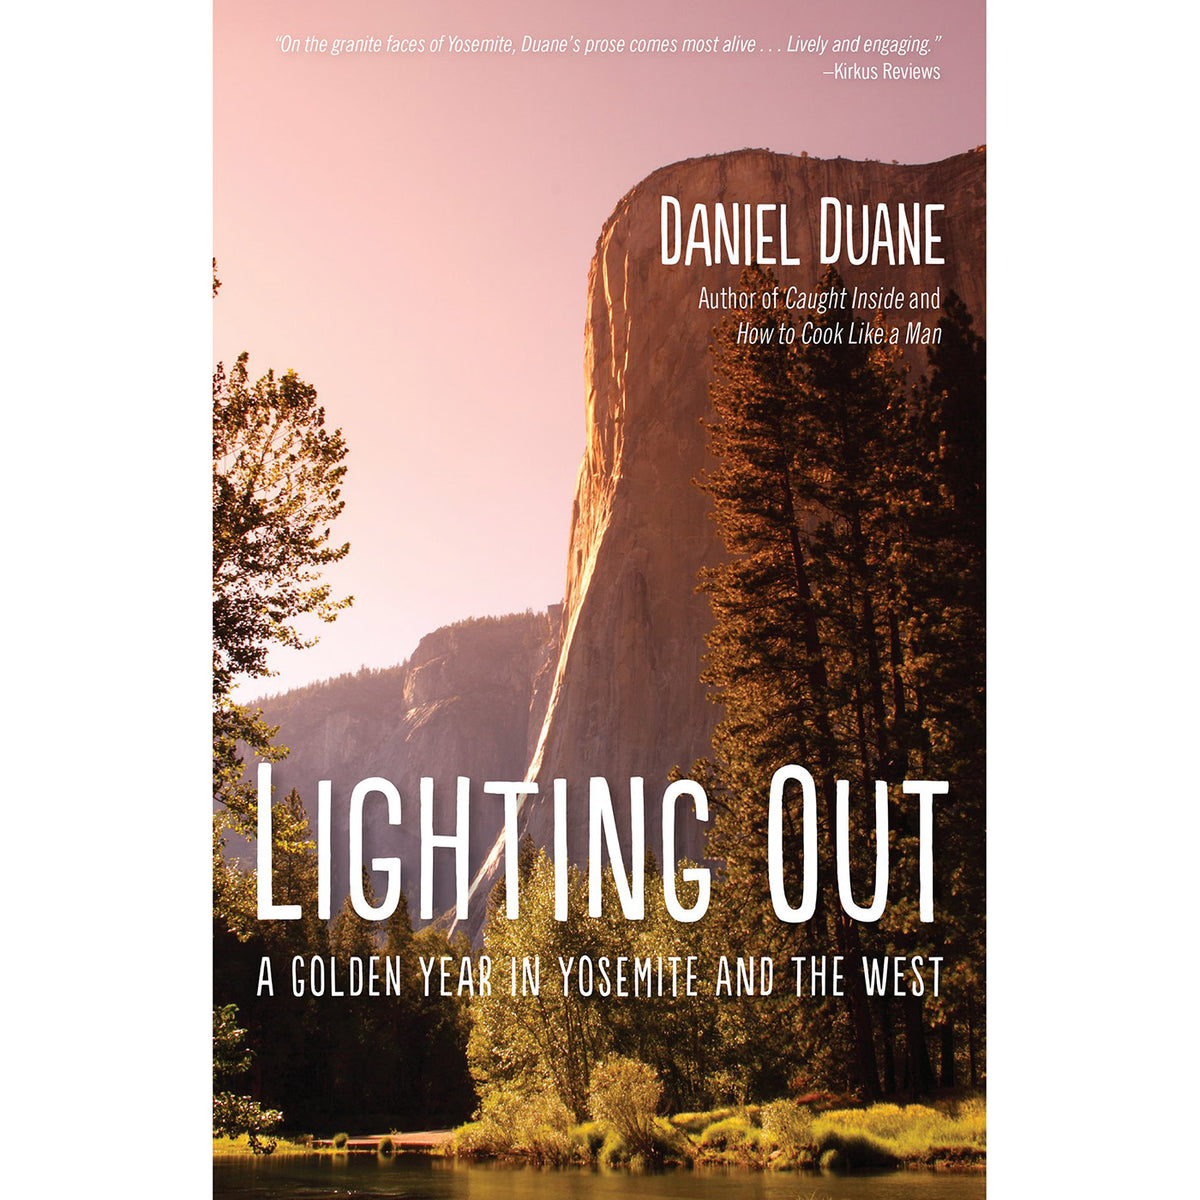 lighting out: a golden year in yosemite and the west